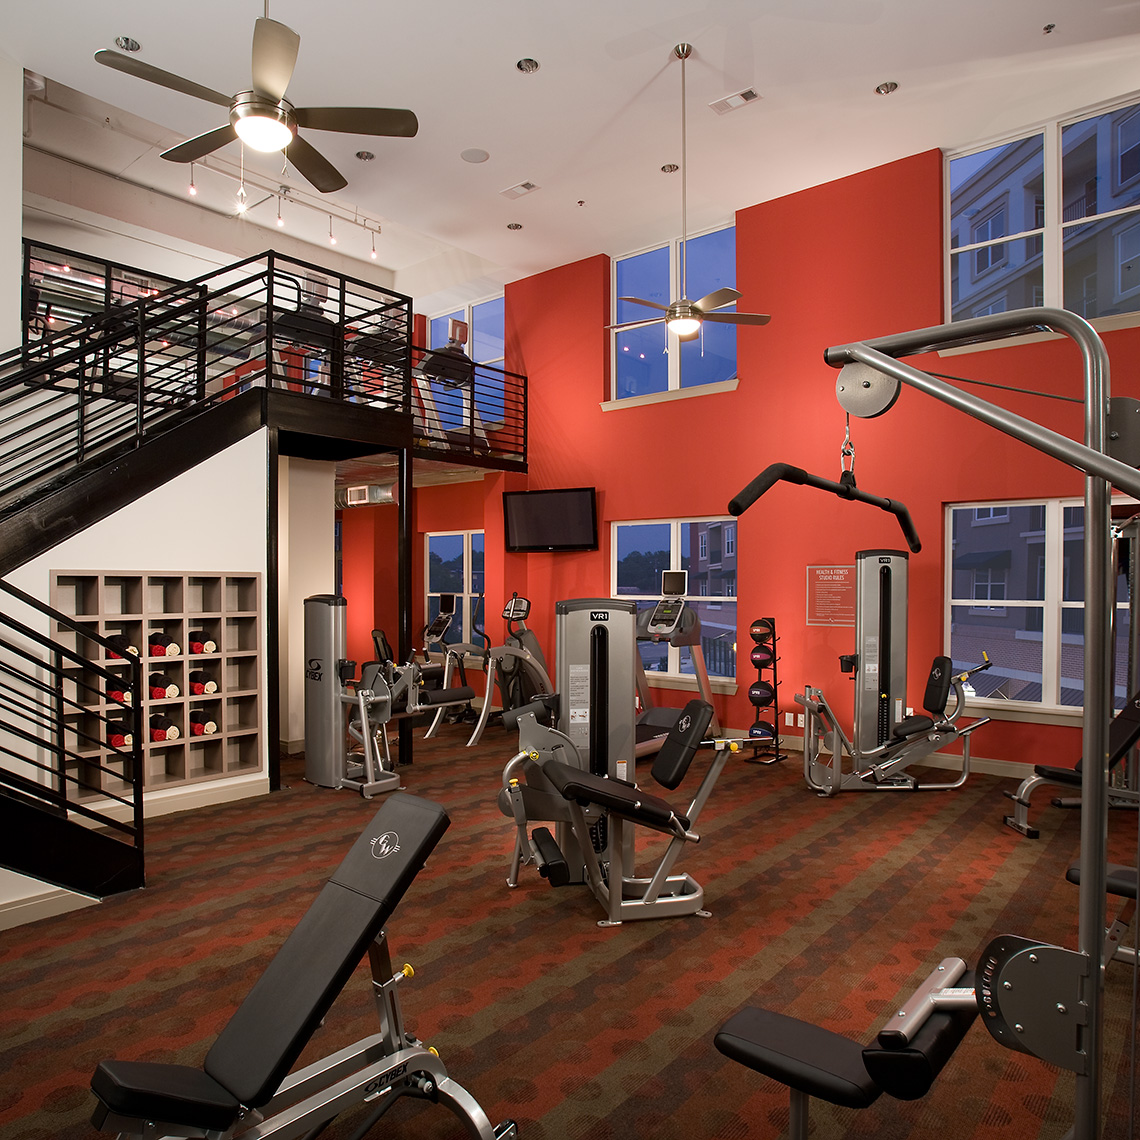 A photo of the two-story fitness center at Goodwynn at Town Brookhaven at twilight, featuring a red wall